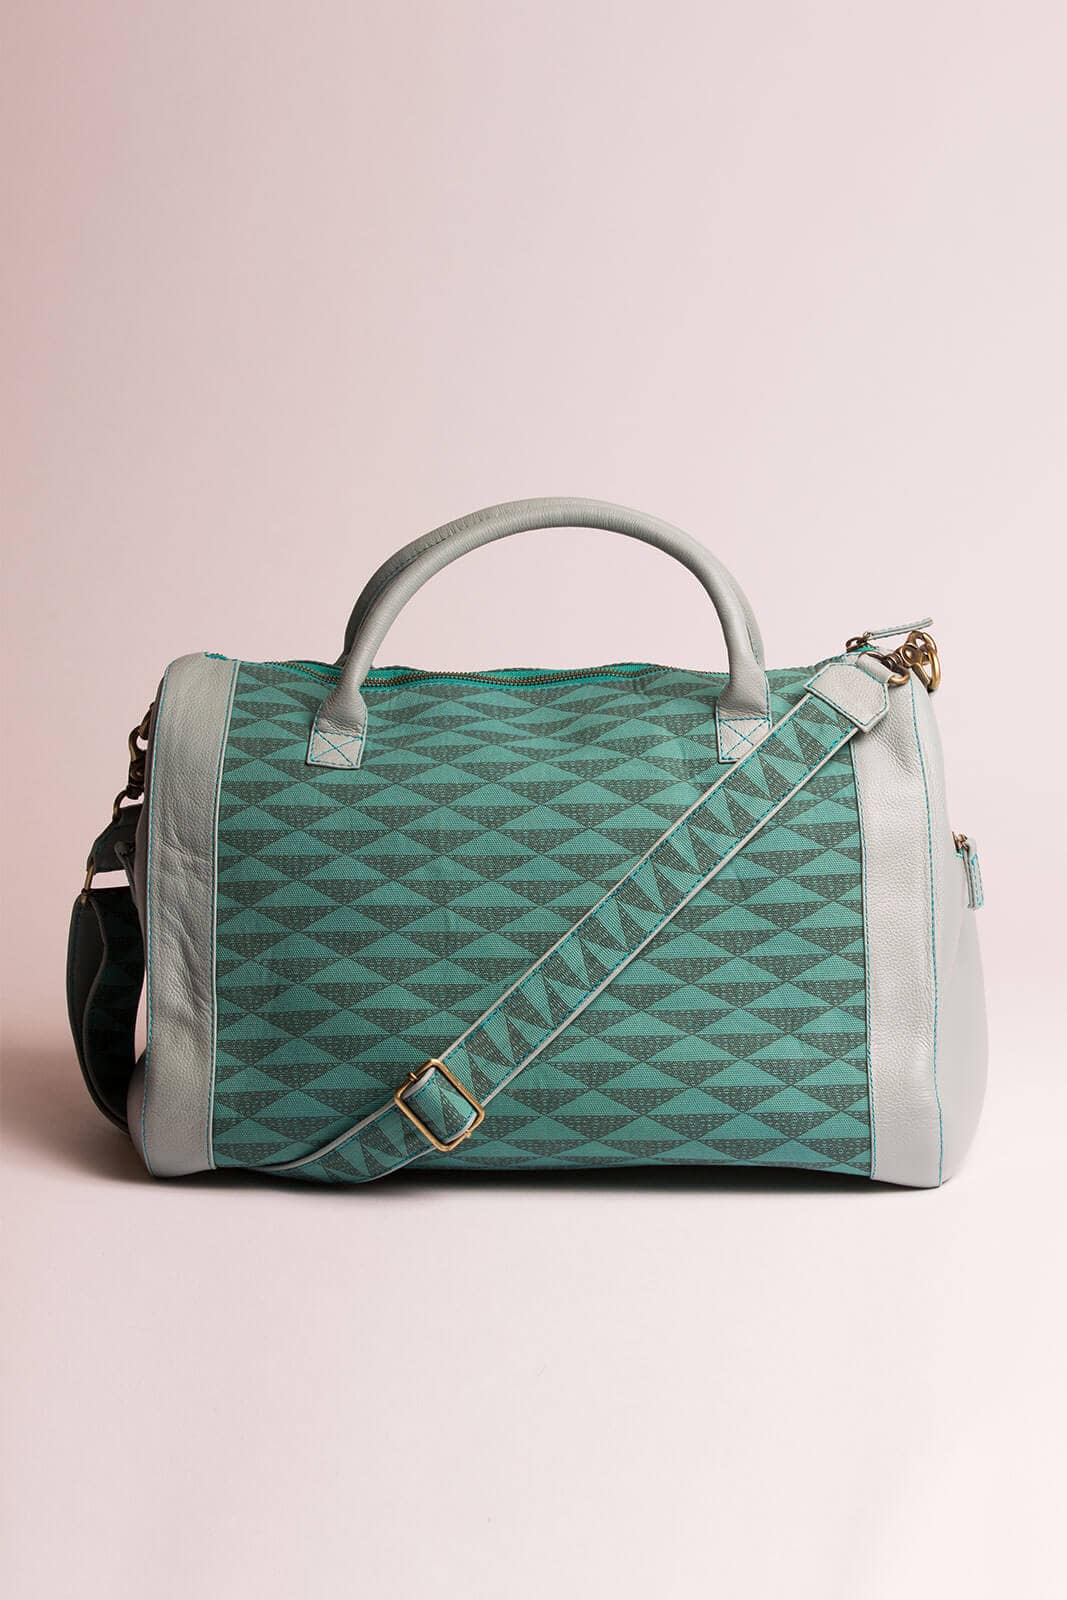 Manaola Duffle Bag in Green and Teal